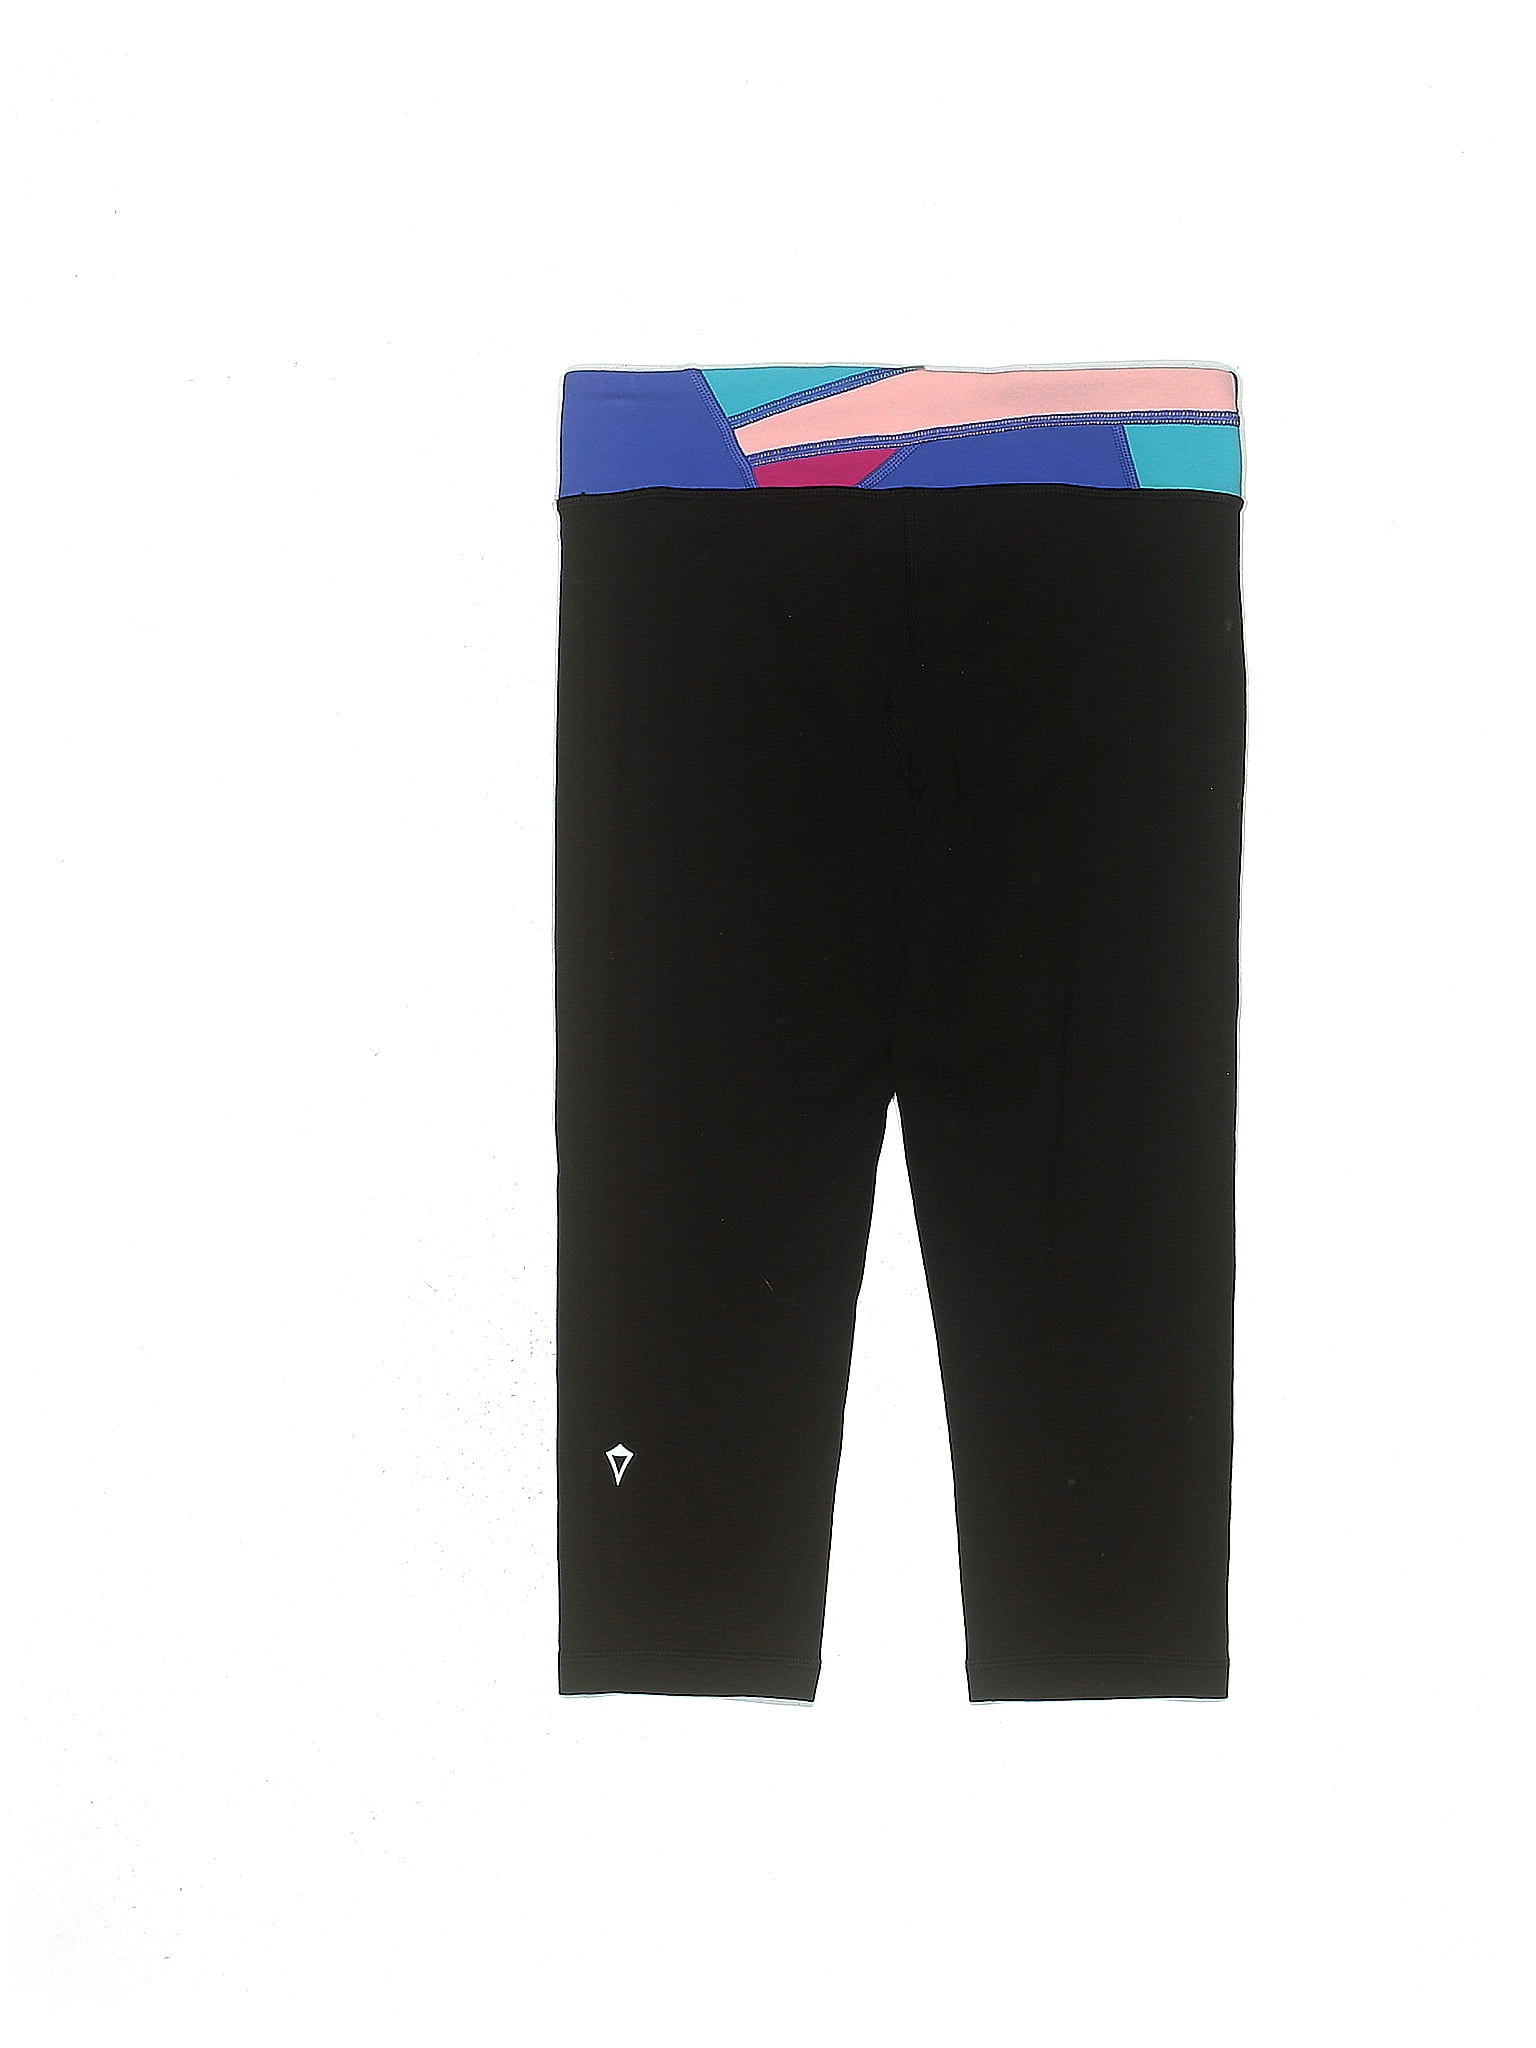 Ivivva Girls' Leggings On Sale Up To 90% Off Retail